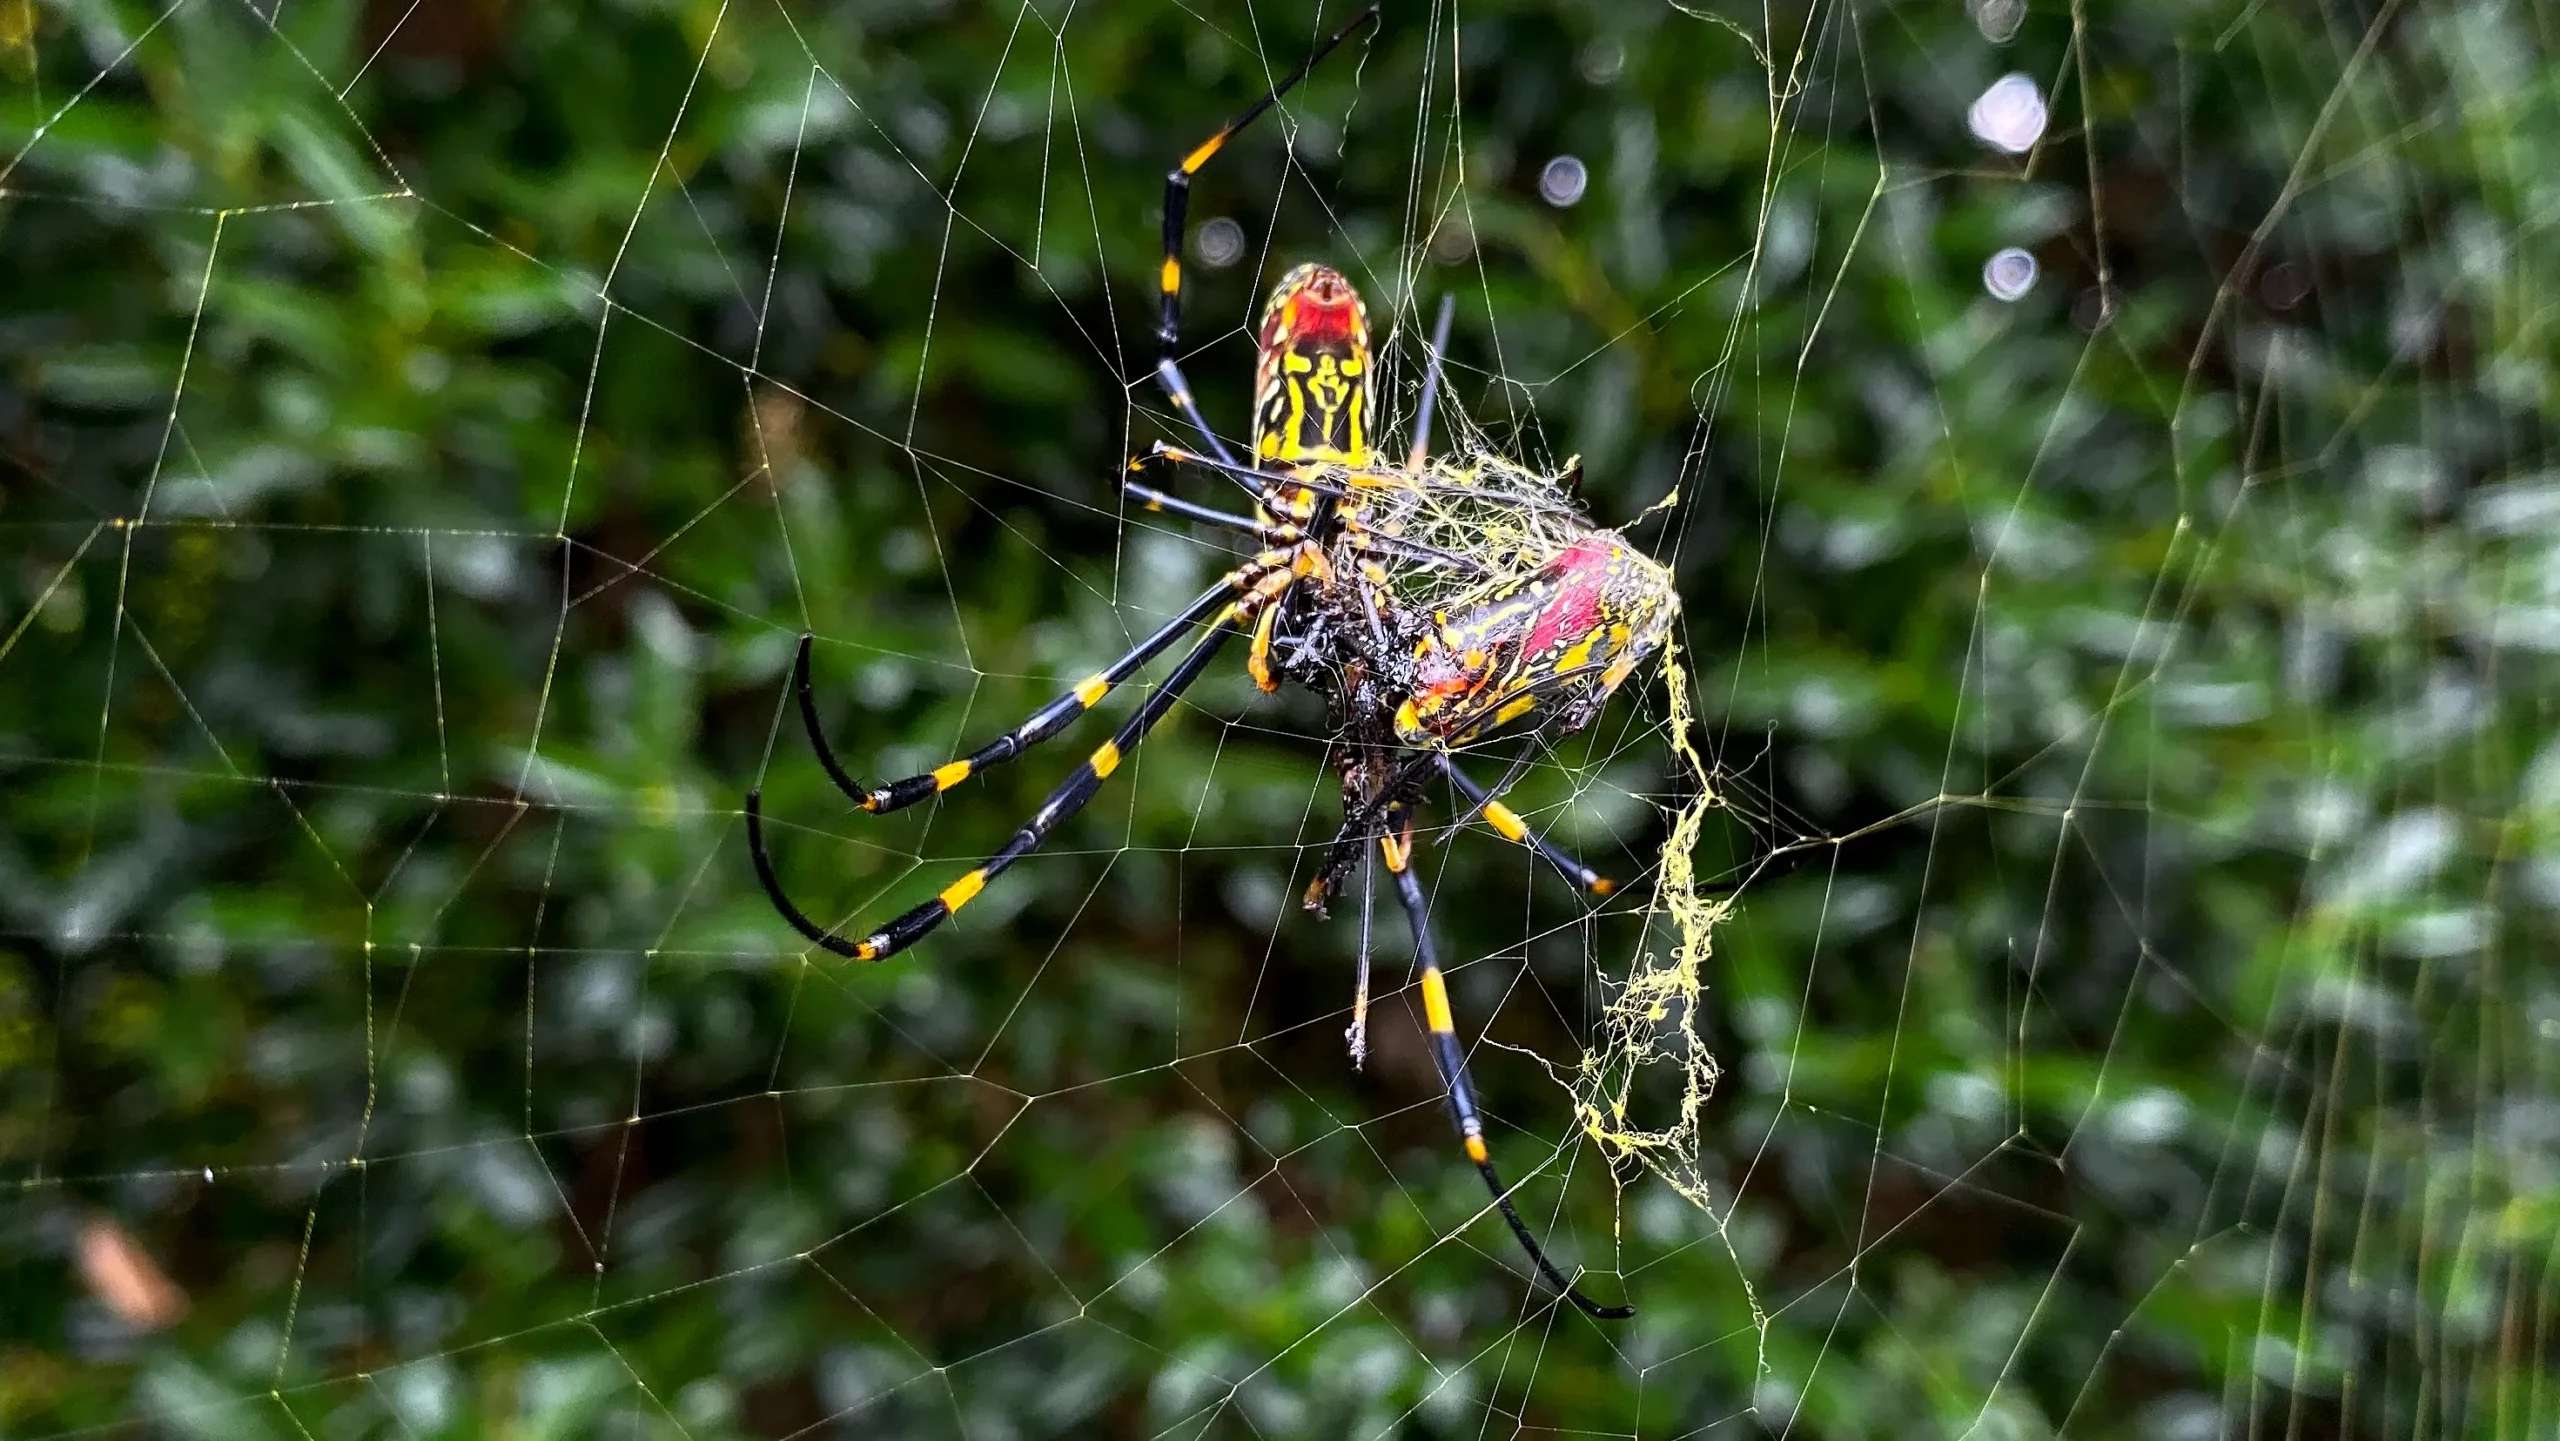 Huge flying spiders have taken over the eastern United States